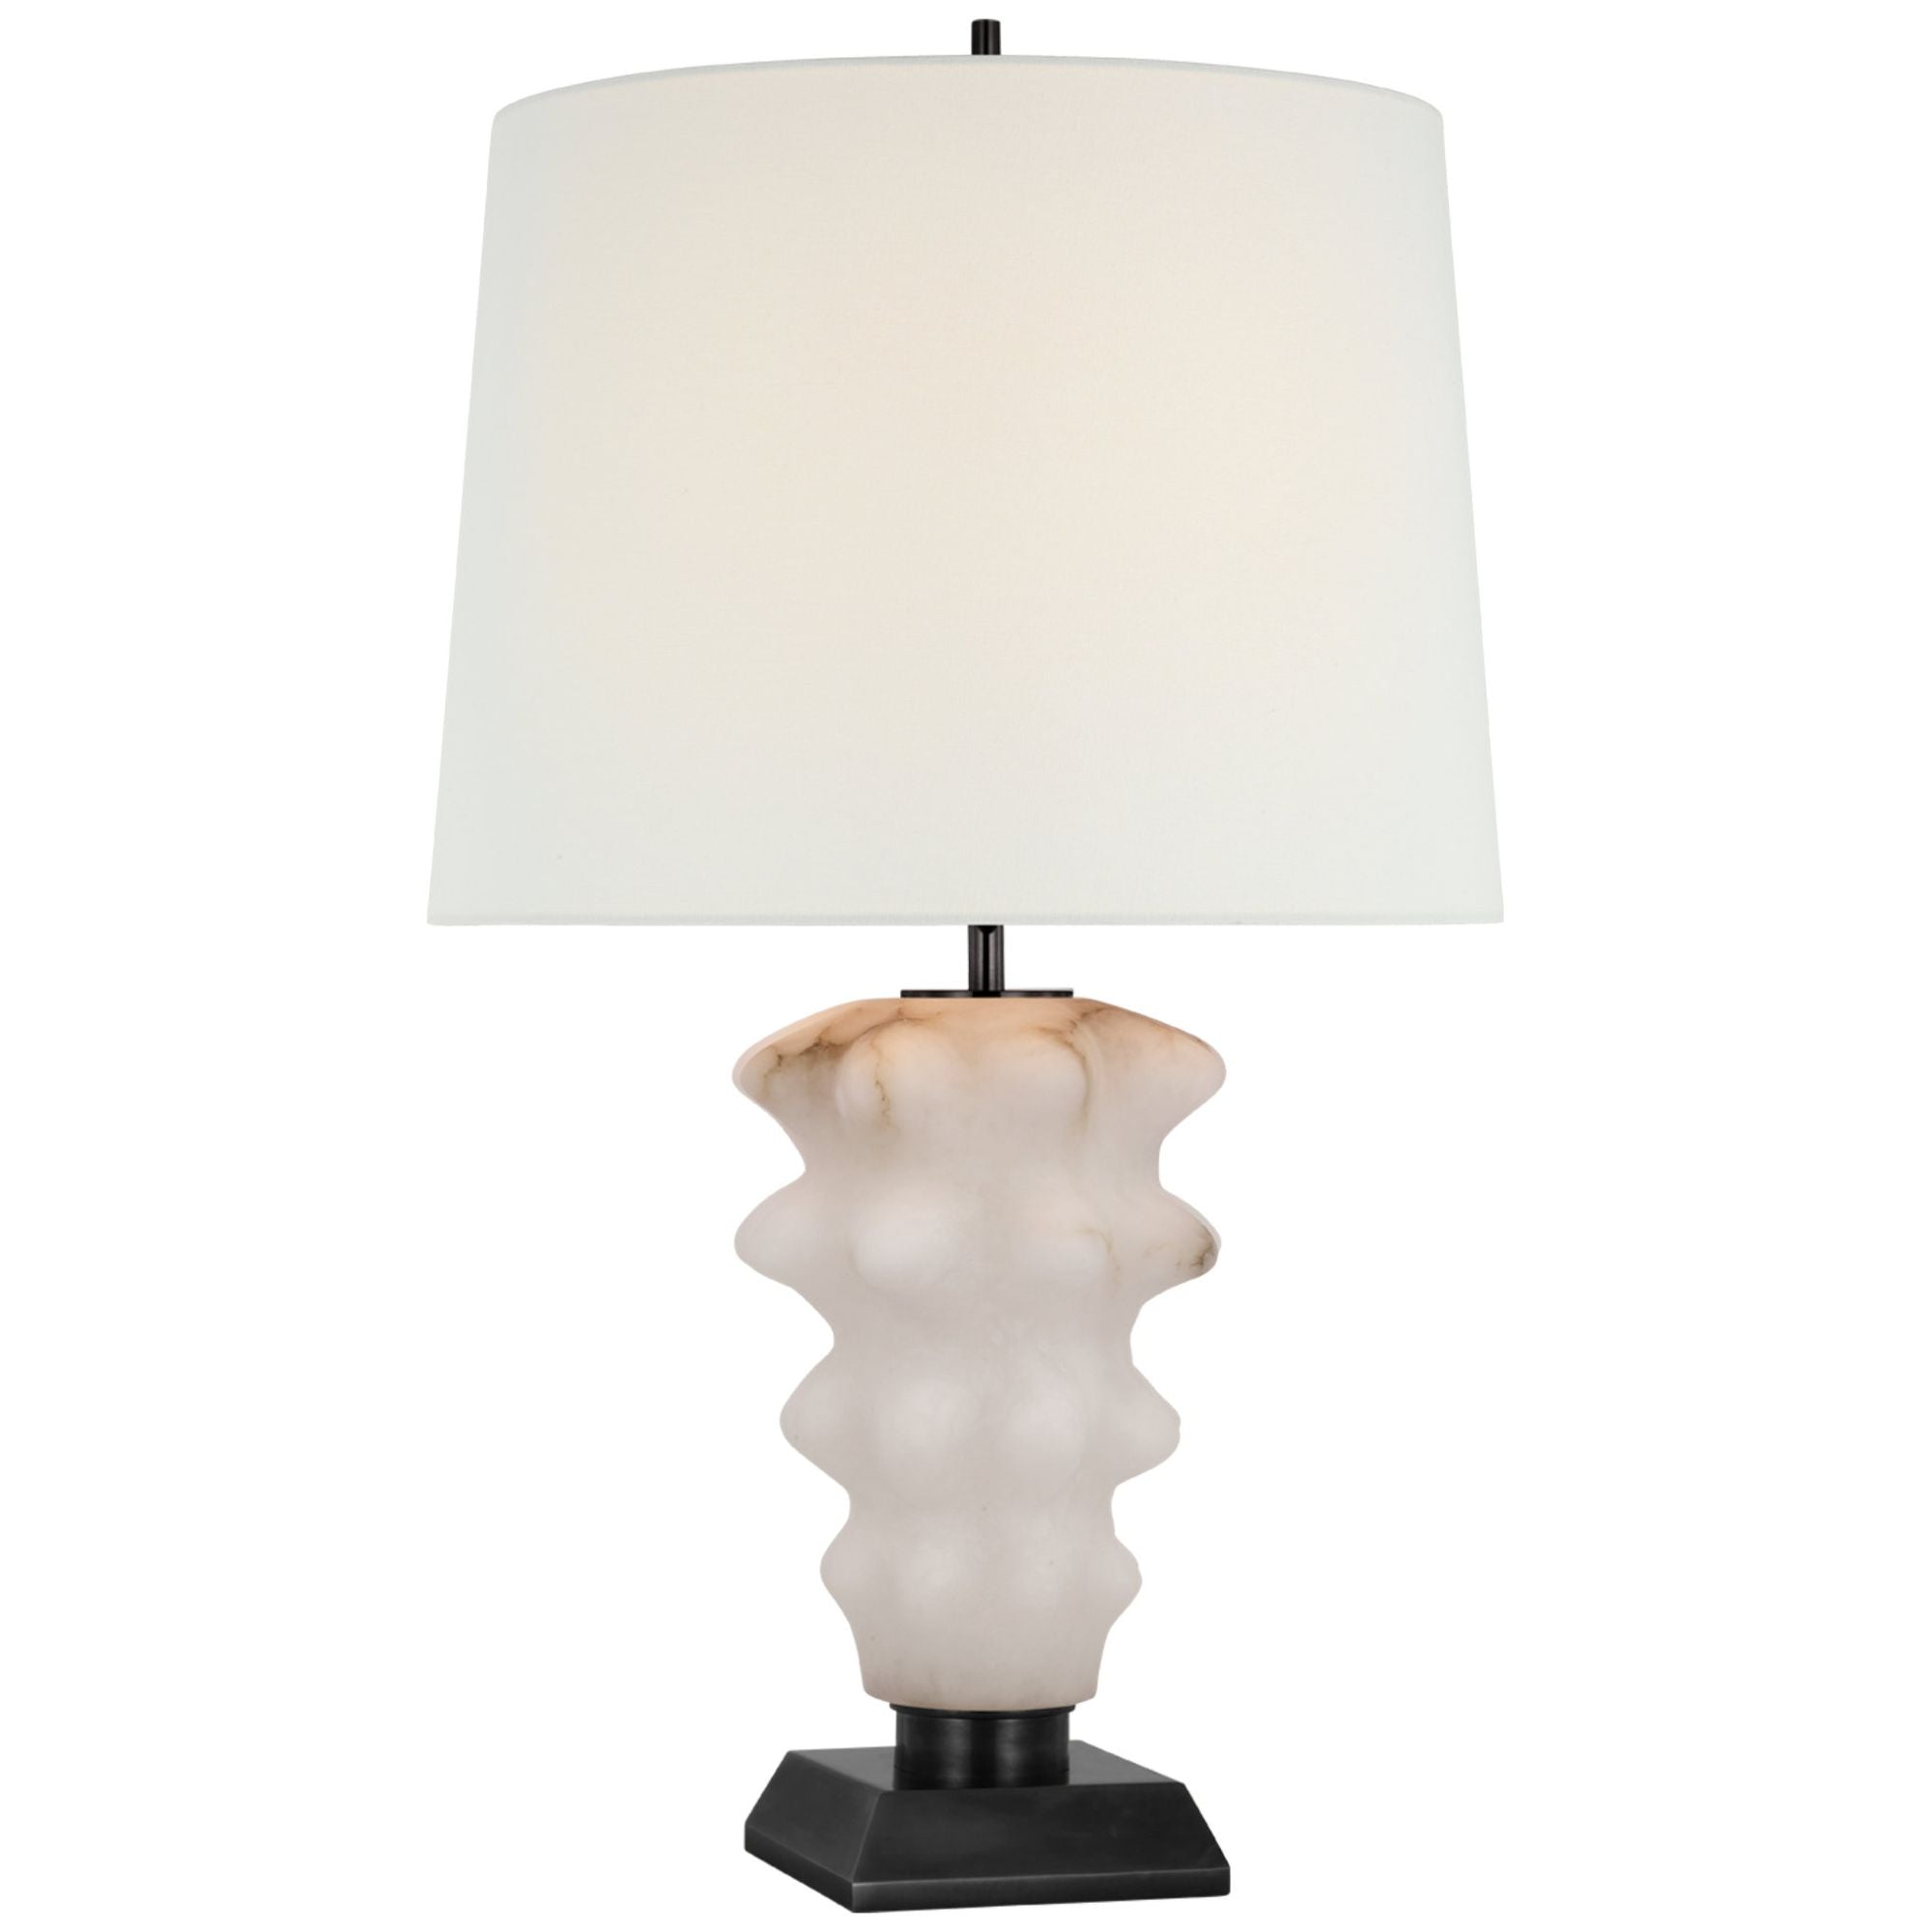 Thomas O'Brien Luxor Large Table Lamp in Alabaster and Bronze with Linen Shade